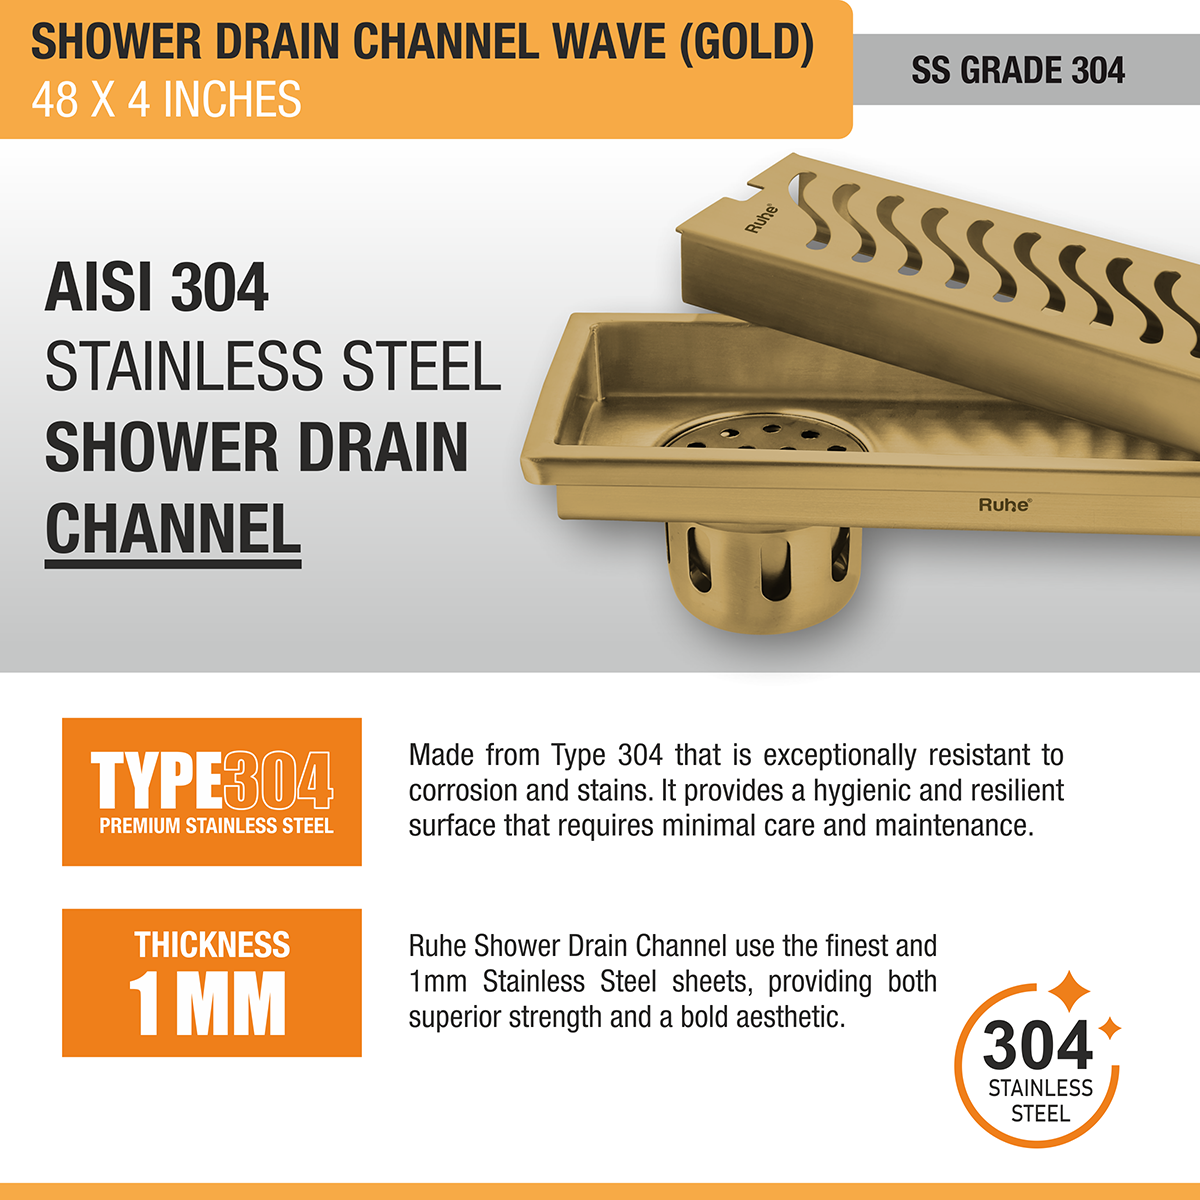 Wave Shower Drain Channel (48 x 4 Inches) YELLOW GOLD stainless steel